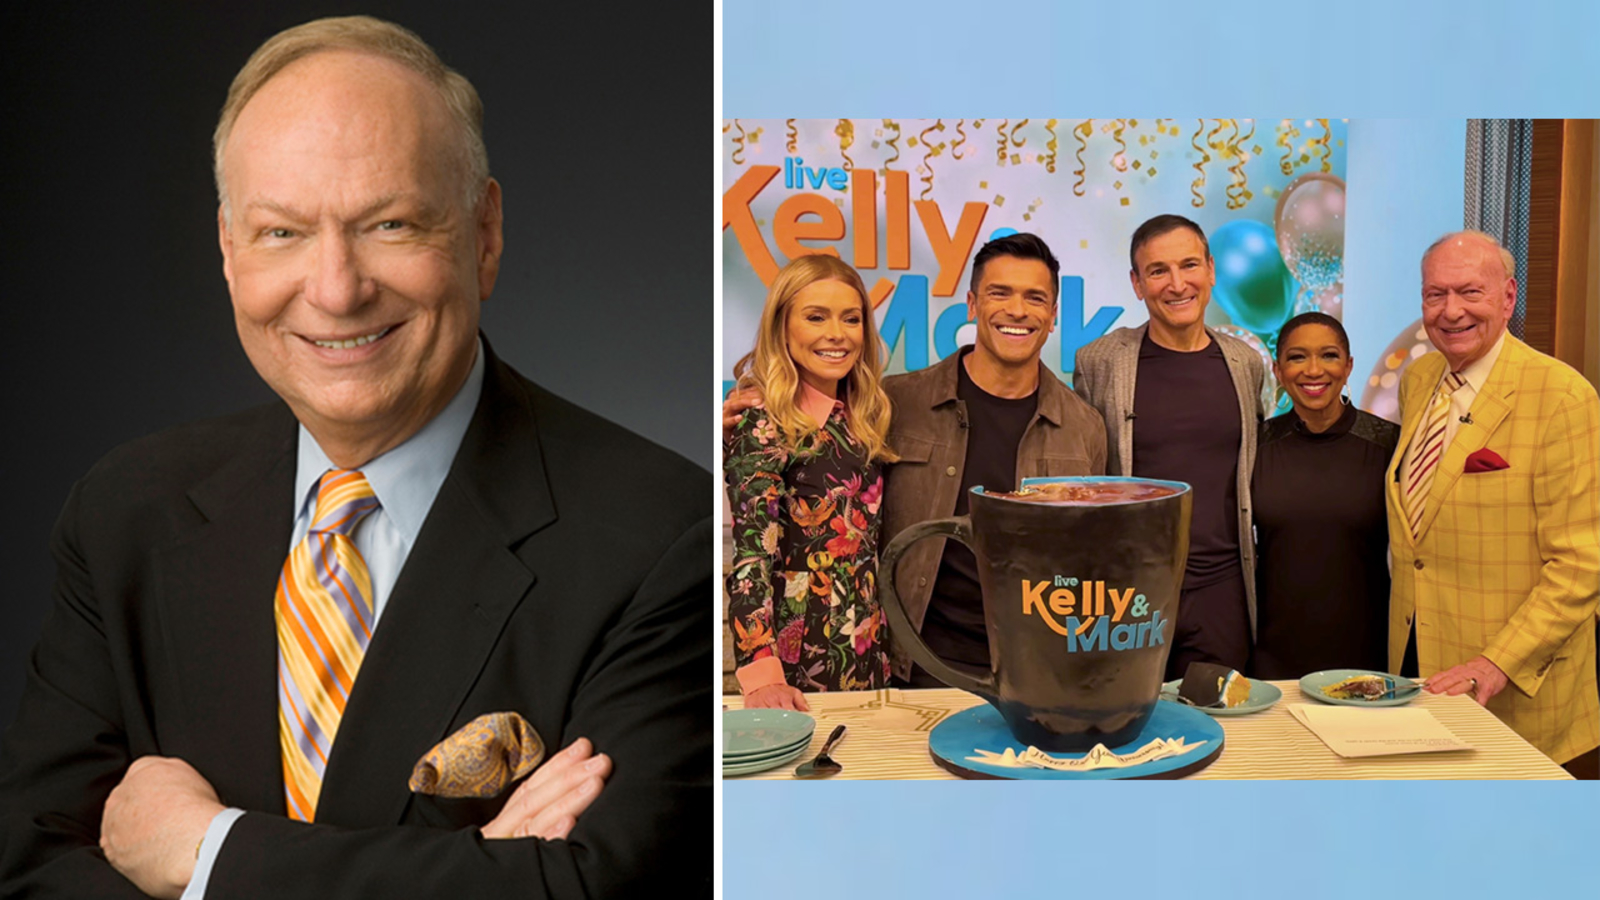 TV Legend Retiring: Art Moore announces retirement on ‘Live with Kelly and Mark’ [Video]